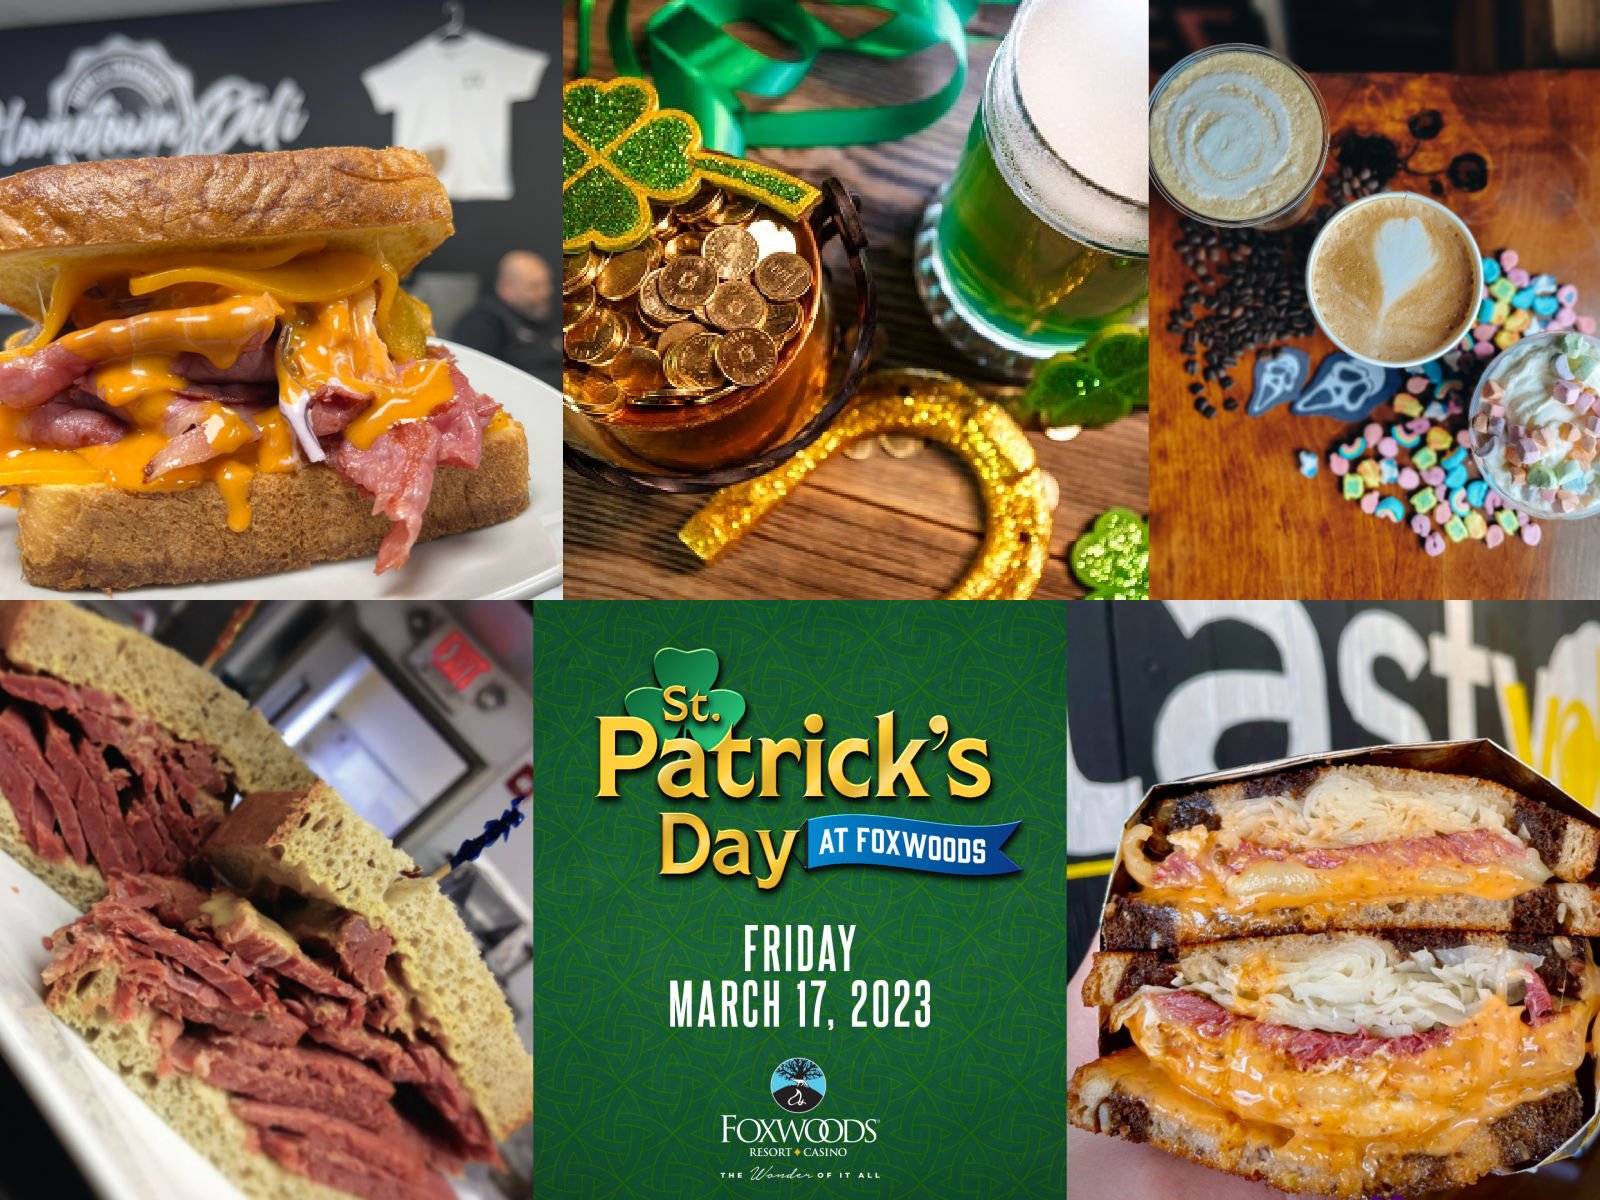 40+ CT Spots to Celebrate St. Patrick's Day 2023: Bars, Restaurants,  Breweries & More! — CT Bites